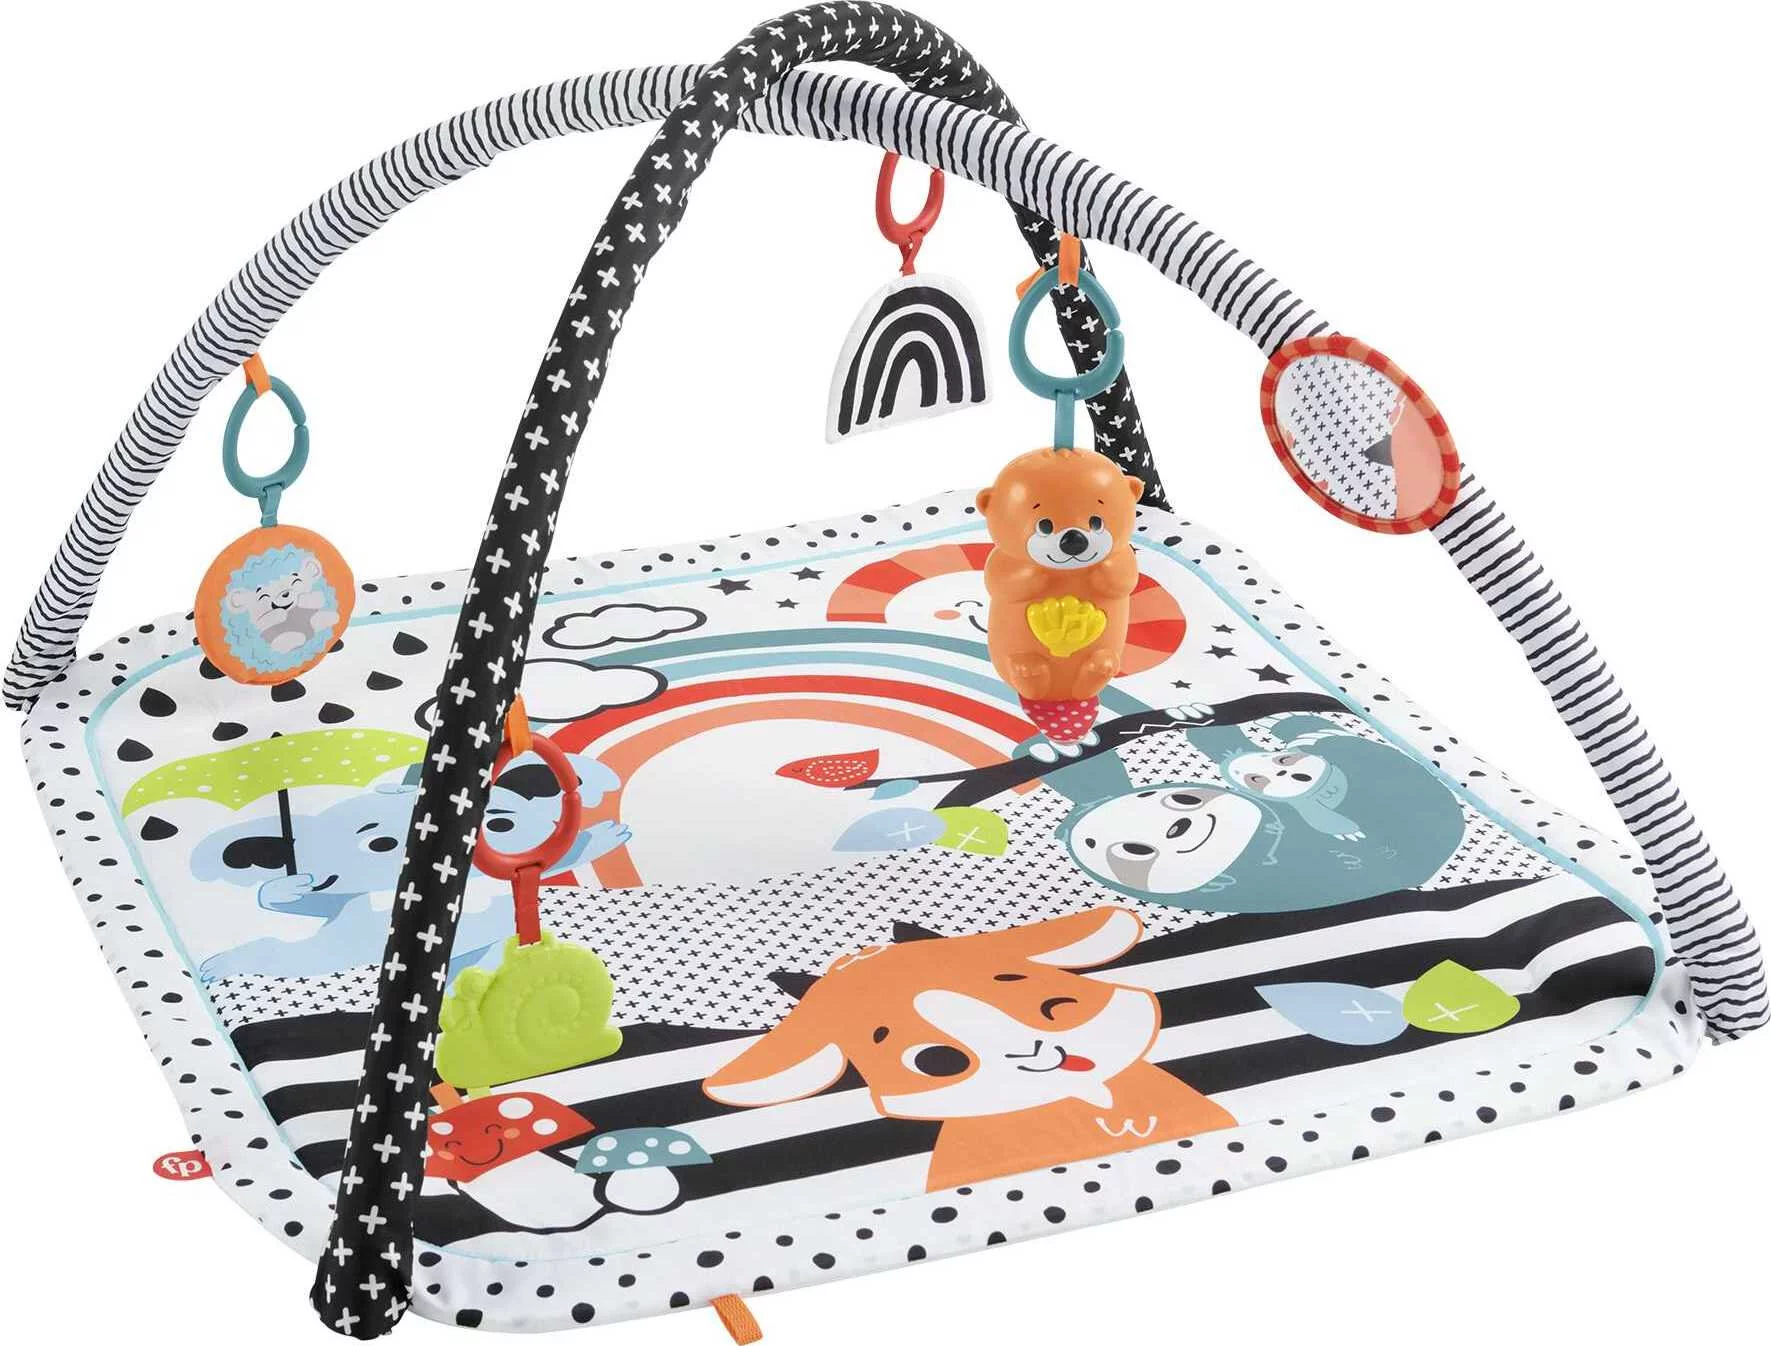 Fisher-Price 3-in-1 Baby Gym Playmat with Sensory Toys Lights and Sounds, Music Glow and Grow Gym